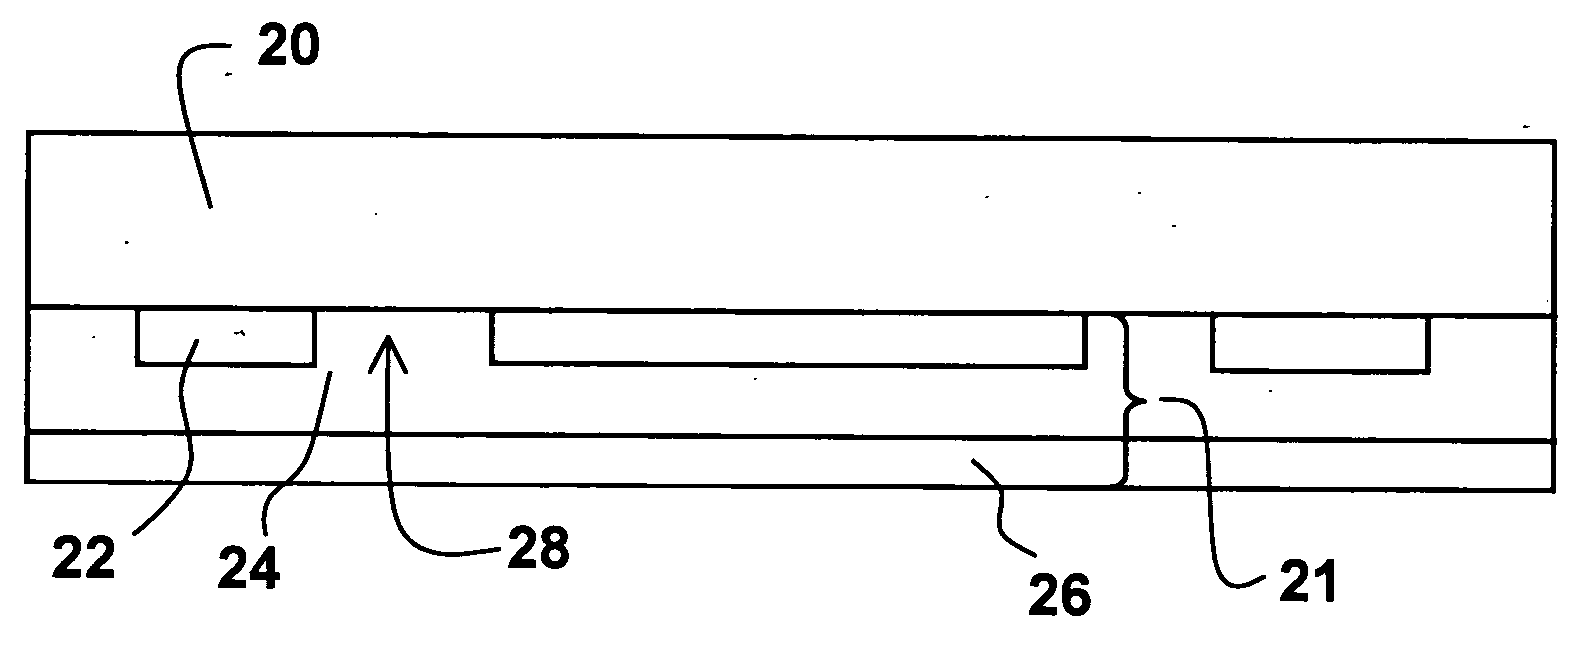 Vacuum roll coated security thin film interference products with overt and/or covert patterned layers